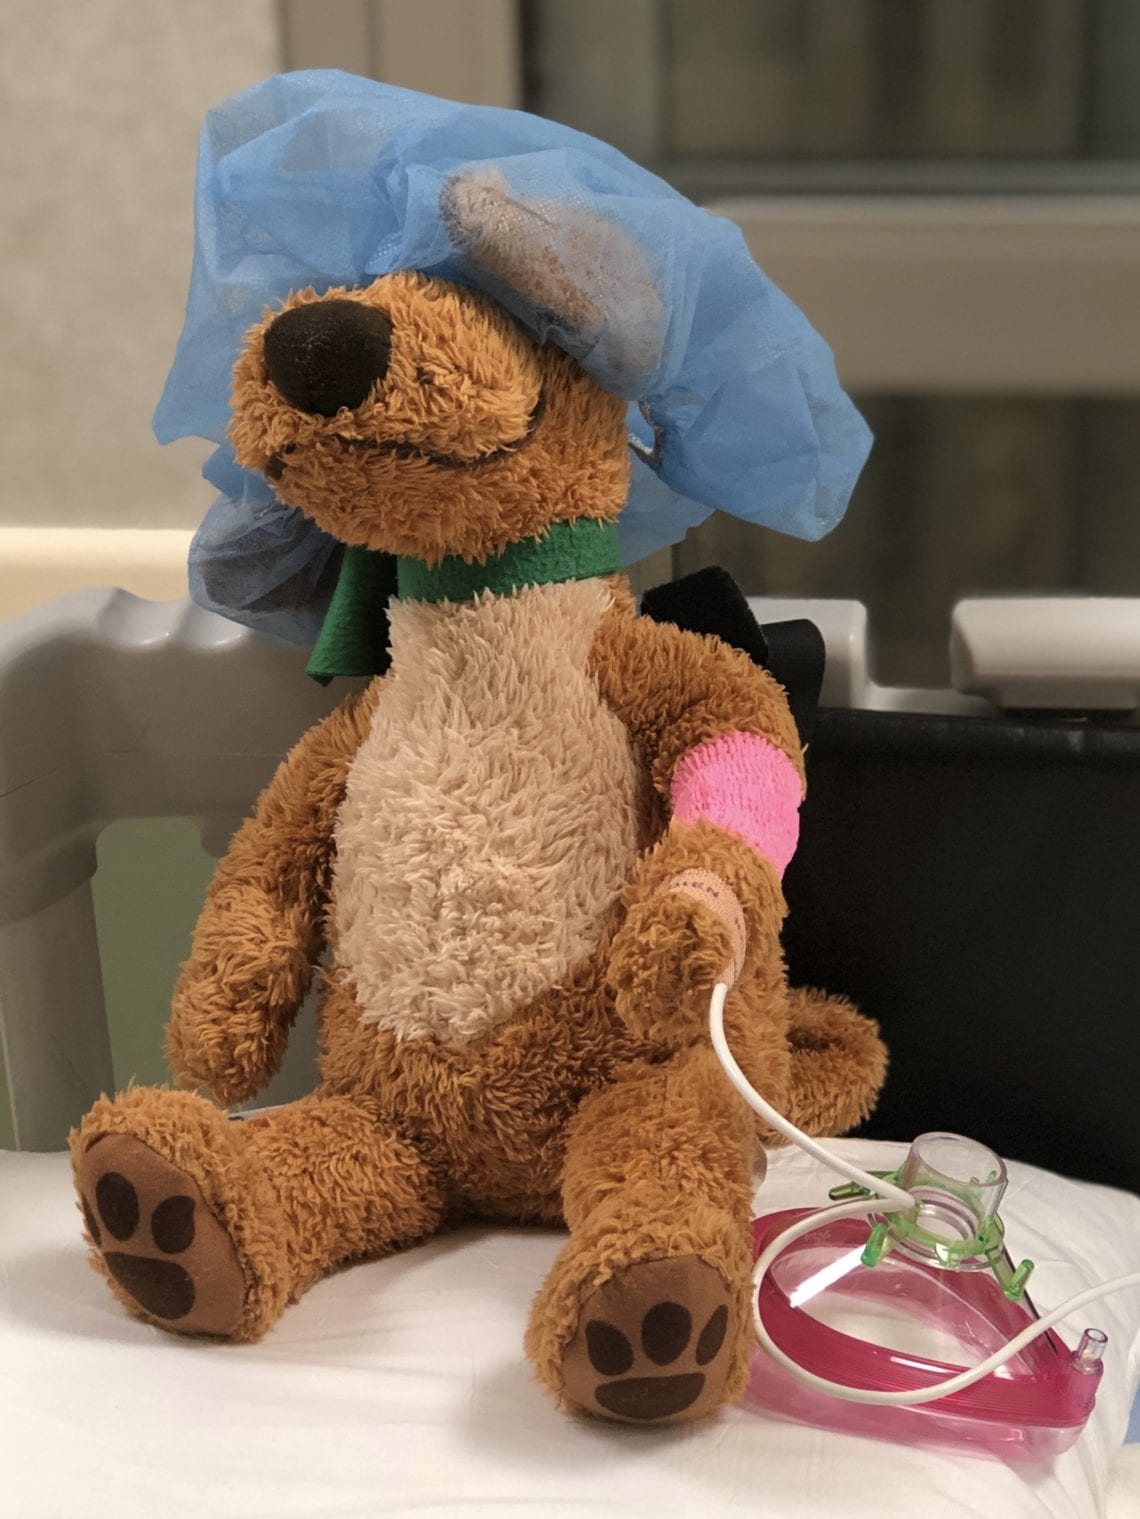 tonsillectomy surgery stuffed animal comfort sooth treatment tonsils hospital with toddler preschooler child kid